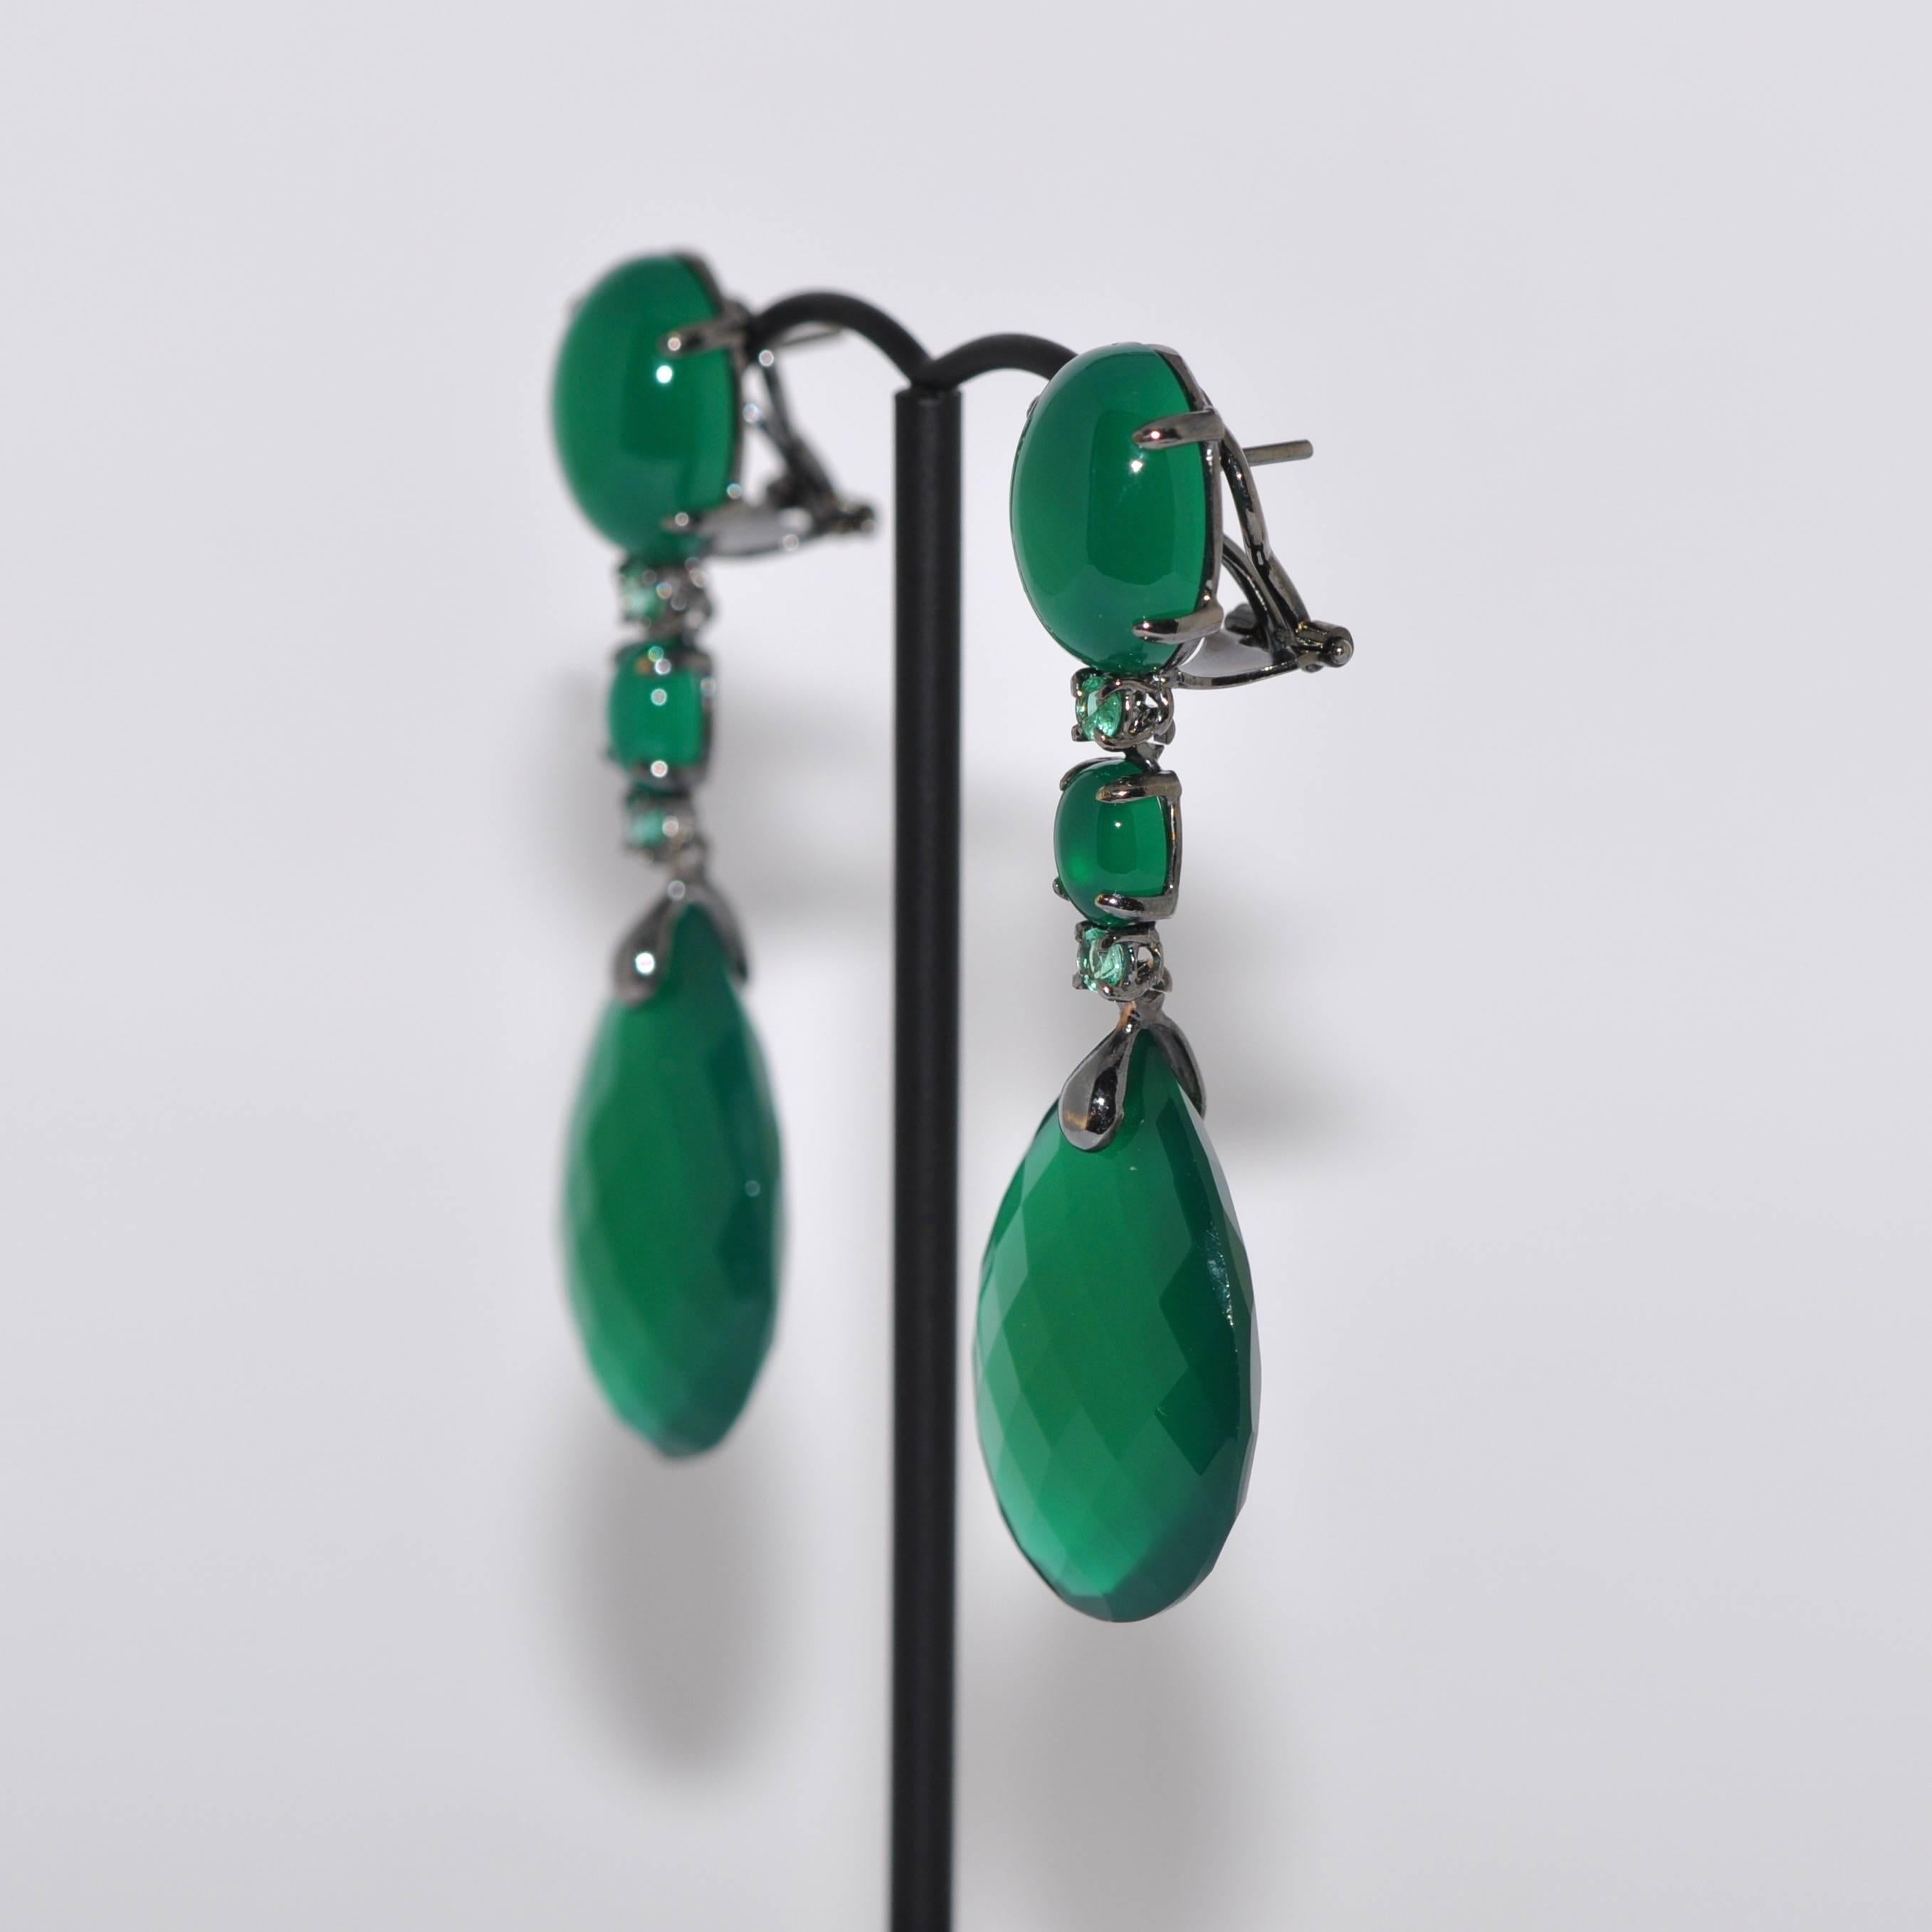 Discover this Green Agate and Emerald on Black Gold Chandelier Earrings.
Green Agate
Emerald
Black Gold 18 Carat 